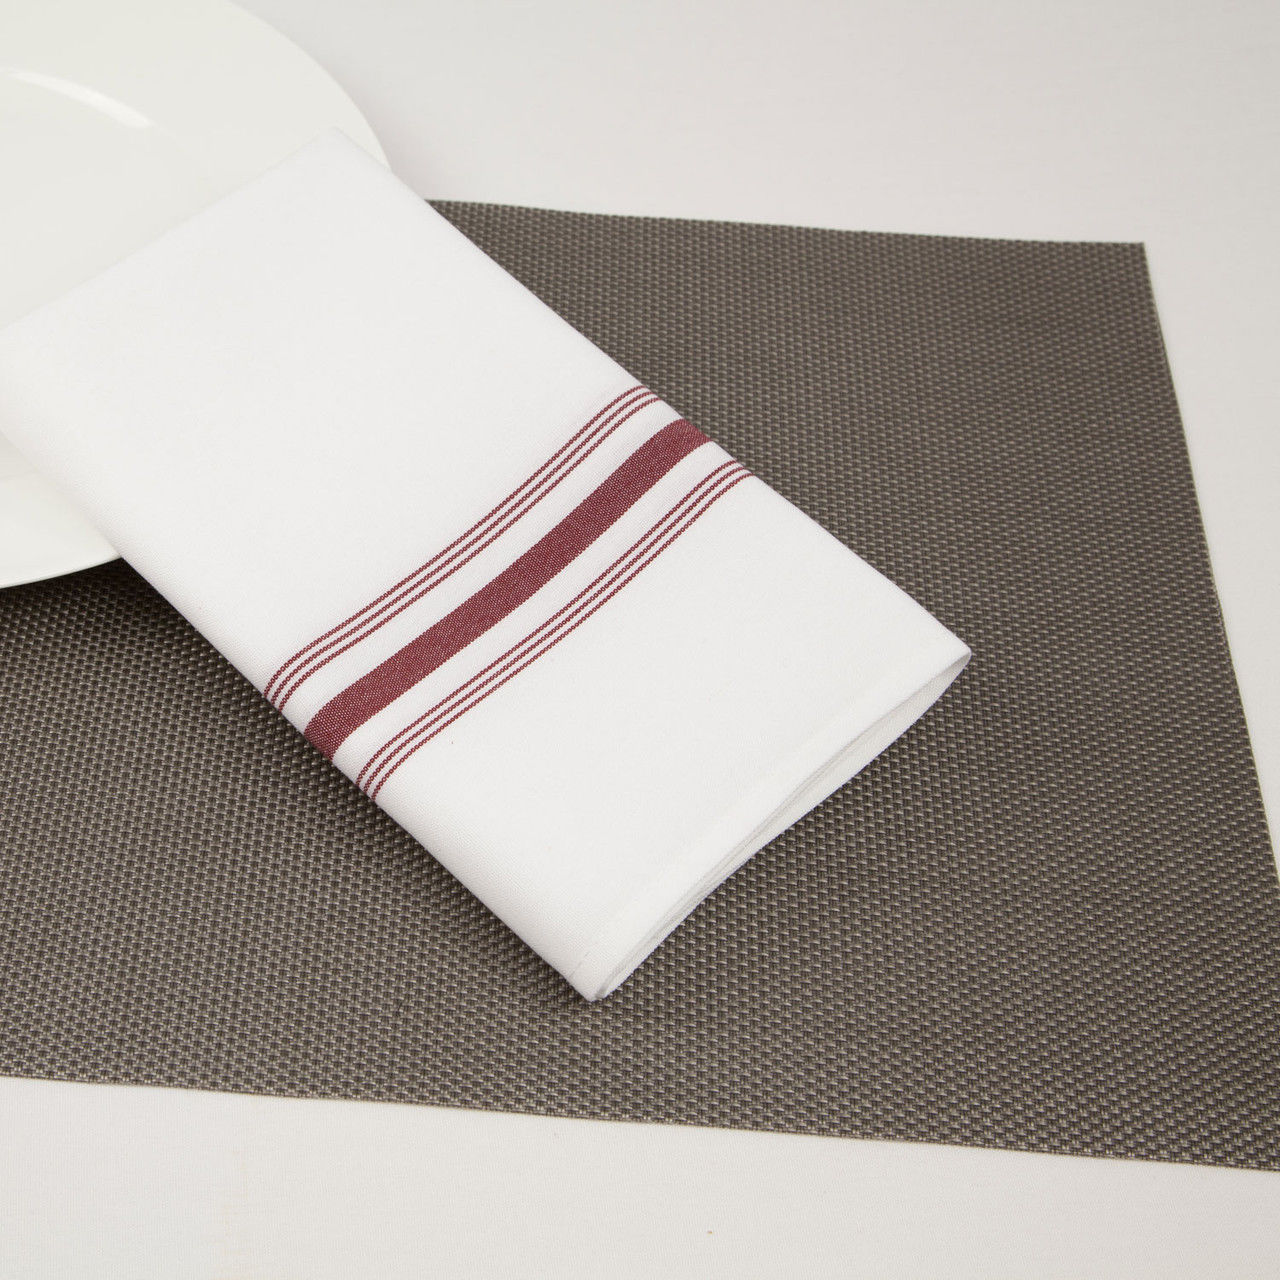 Woven Vinyl Placemats by Riegel Questions & Answers